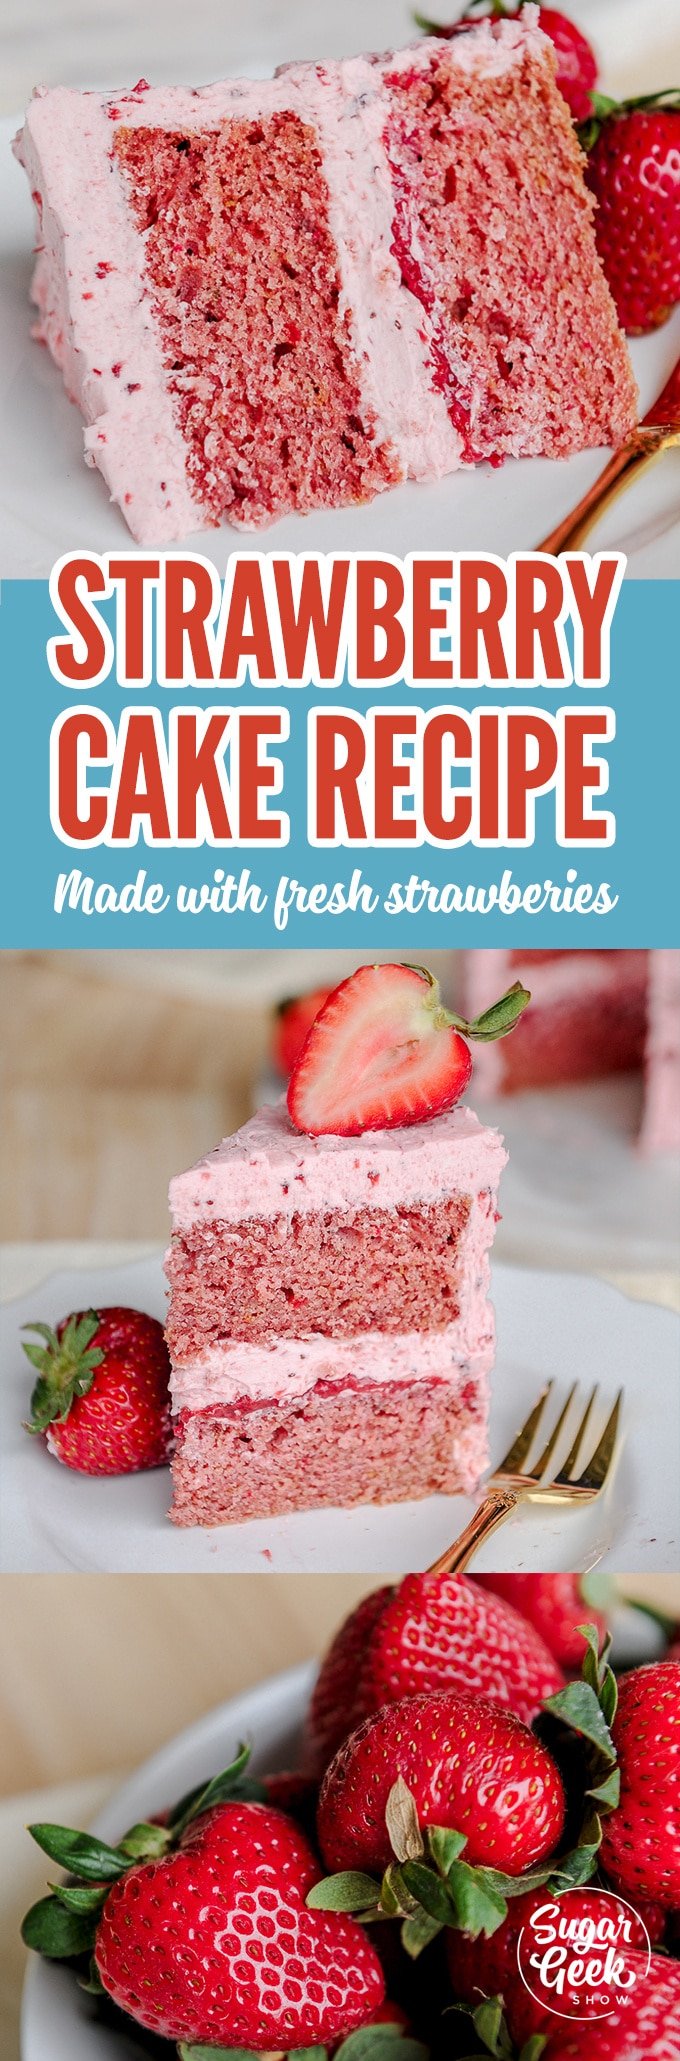 The best strawberry cake recipe made with real strawberries! Amazing flavor and super moist